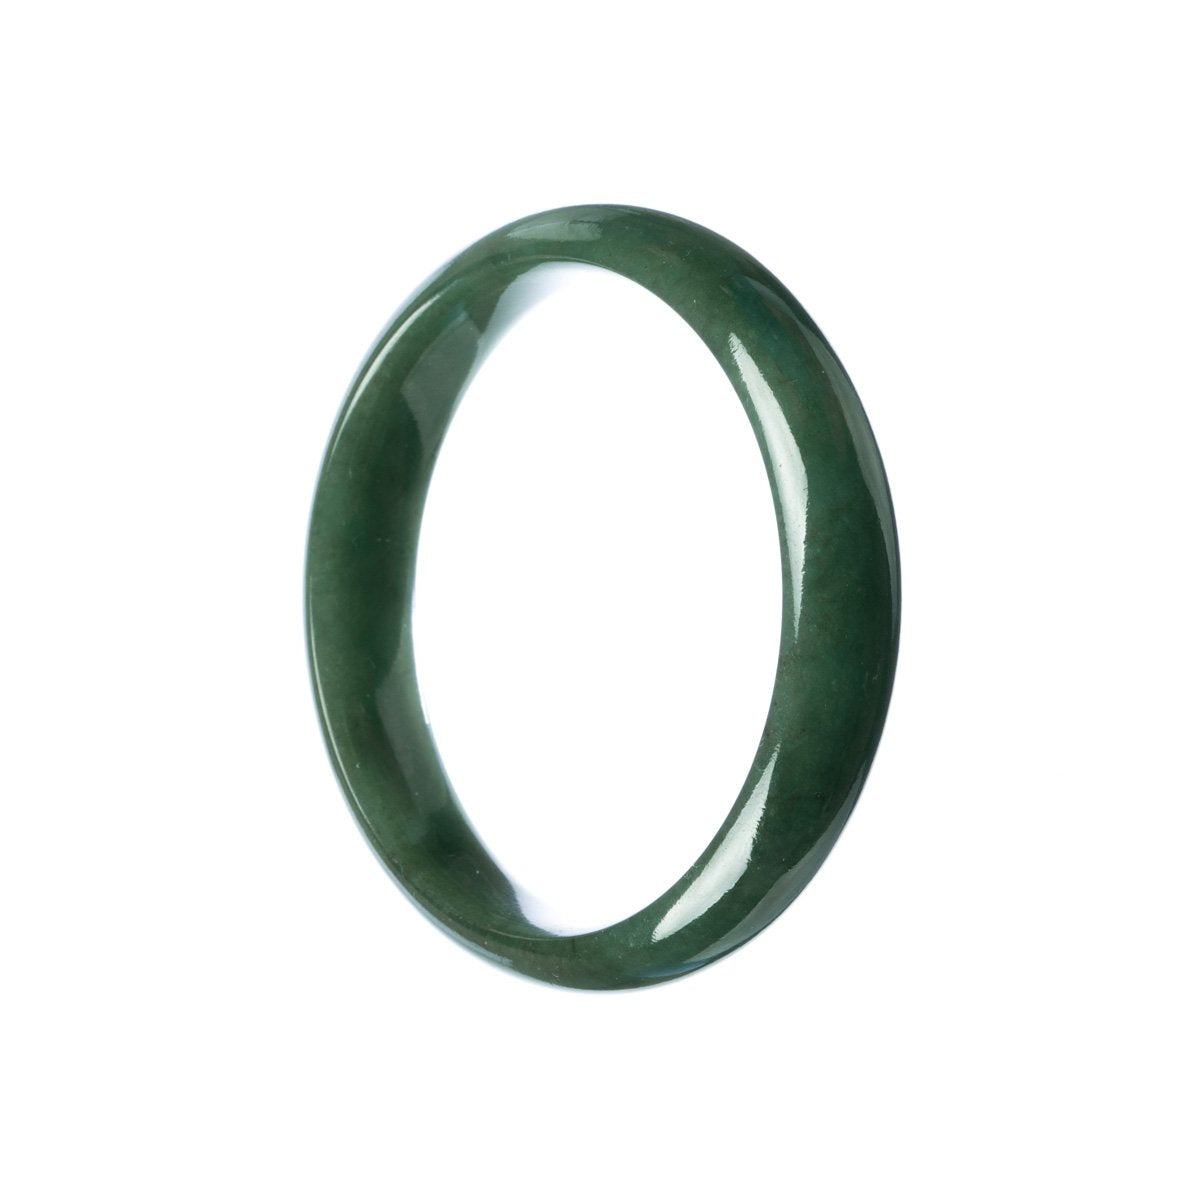 A close-up image of a green jadeite jade bangle bracelet with a half-moon design, measuring 57mm in diameter. This bracelet is certified as natural and is made by the brand MAYS™.